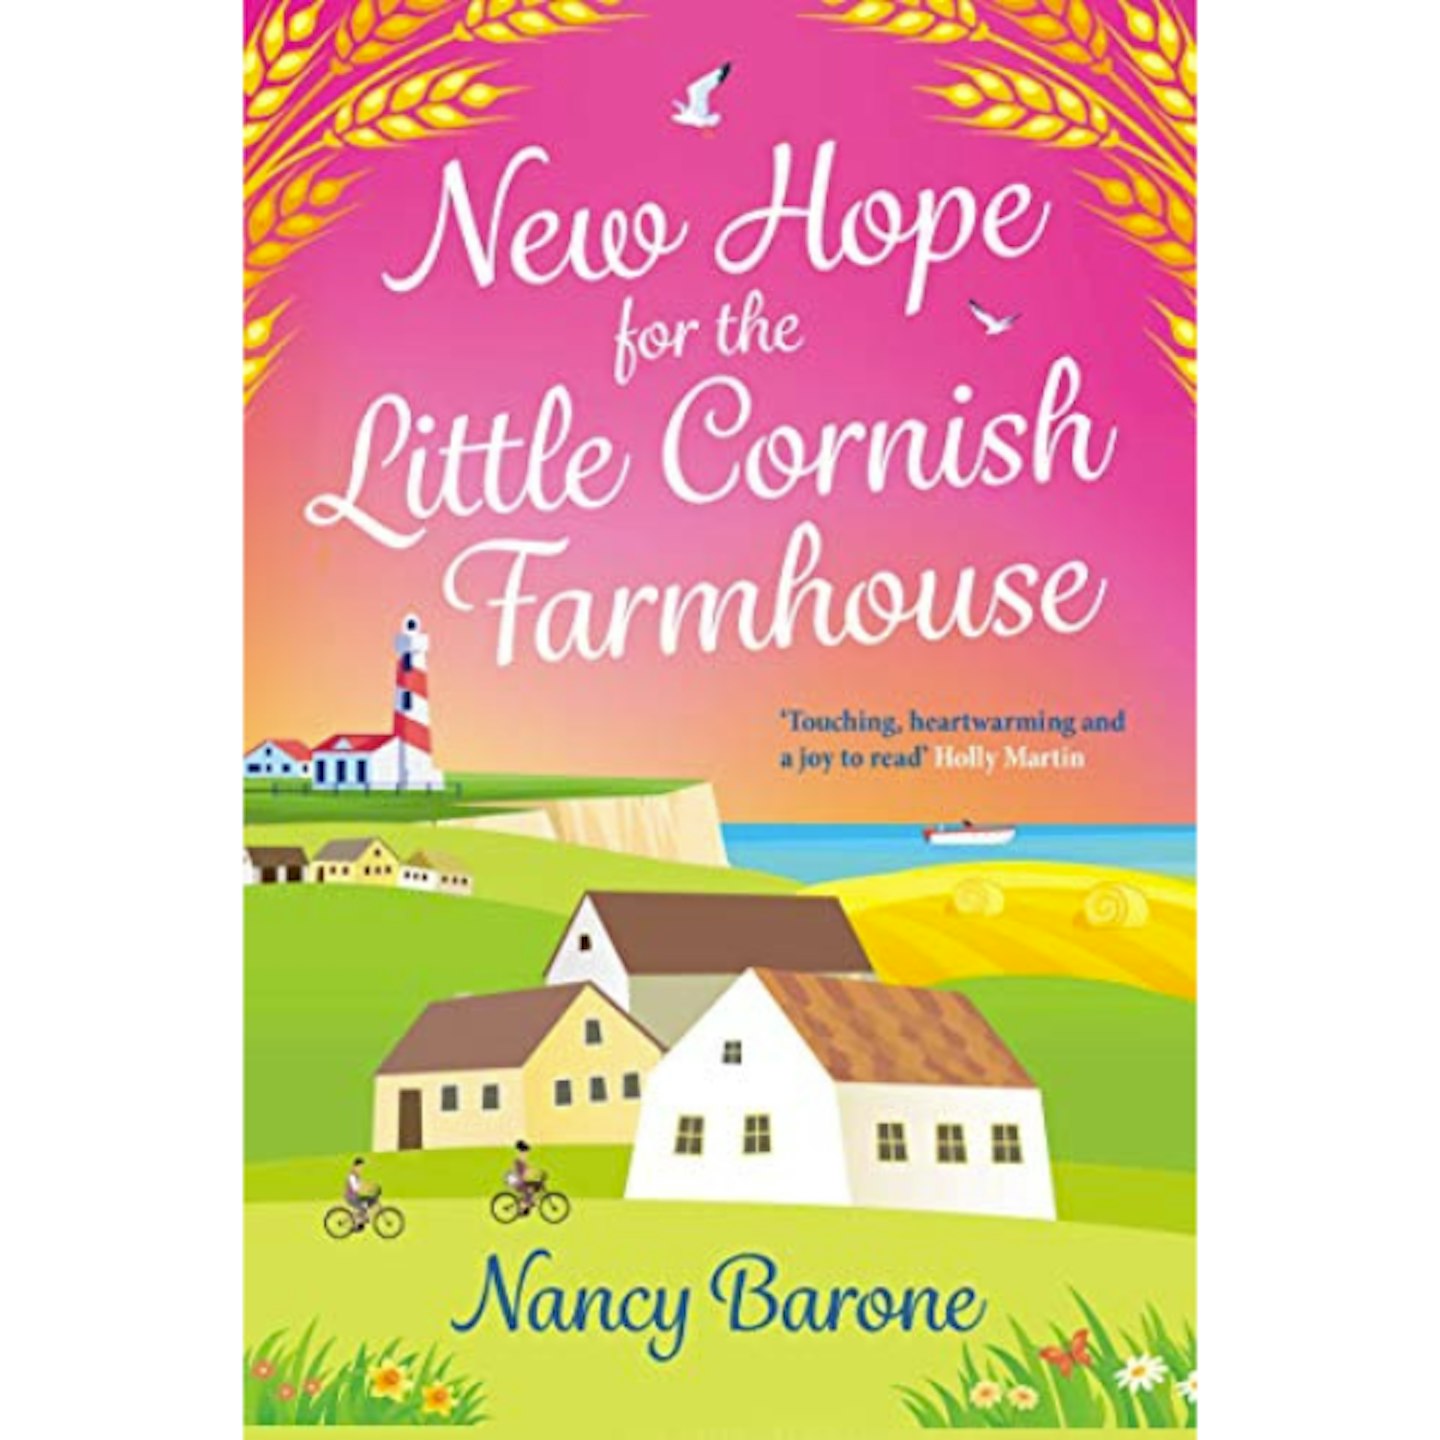 New Hope for the Little Cornish Farmhouse by Nancy Barone